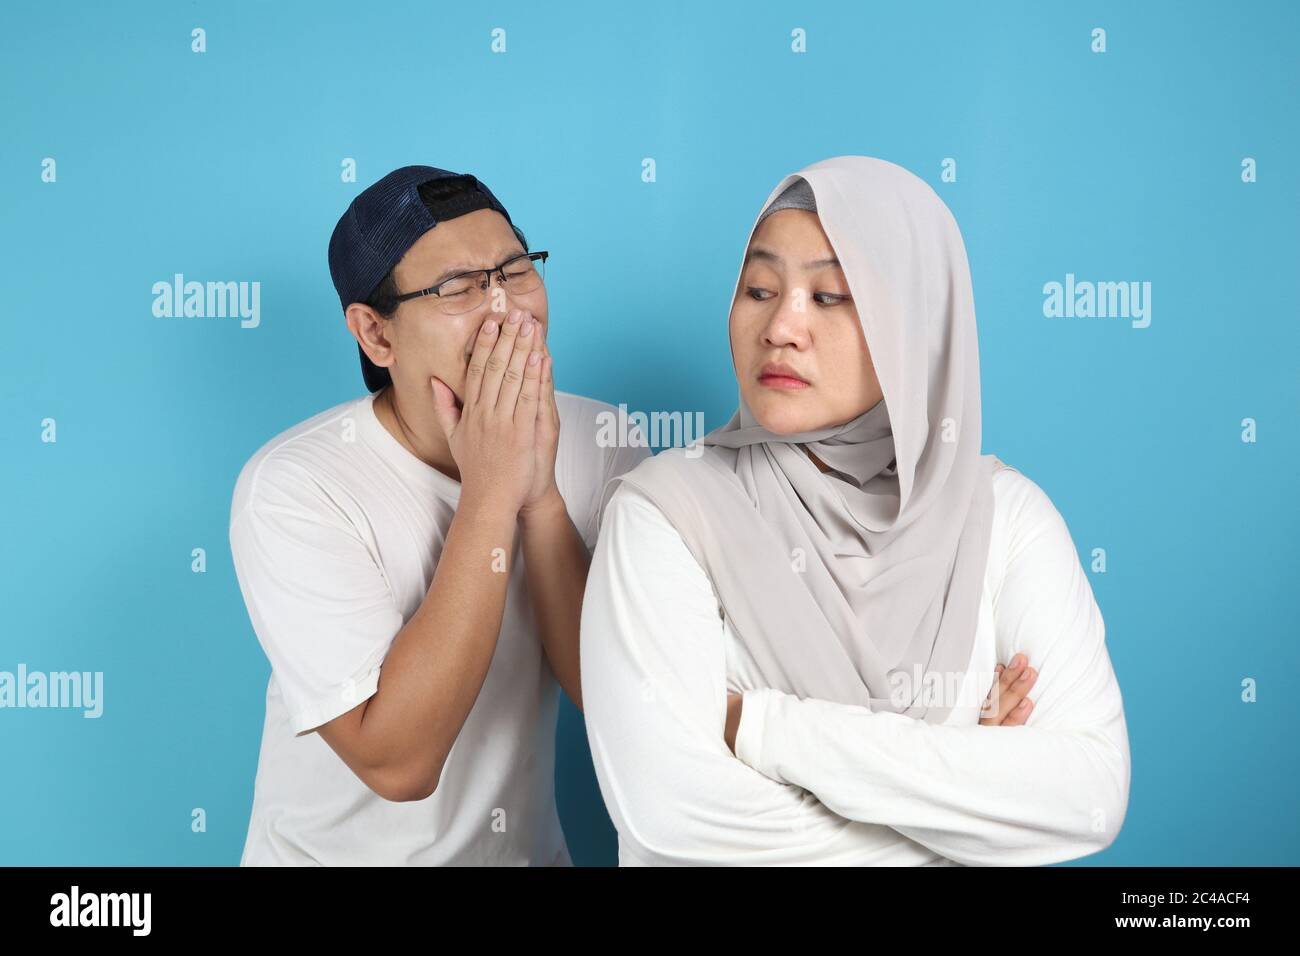 Muslim couple having conflict, husband trying to resolve, persuade and apologize to his wife after fight Stock Photo